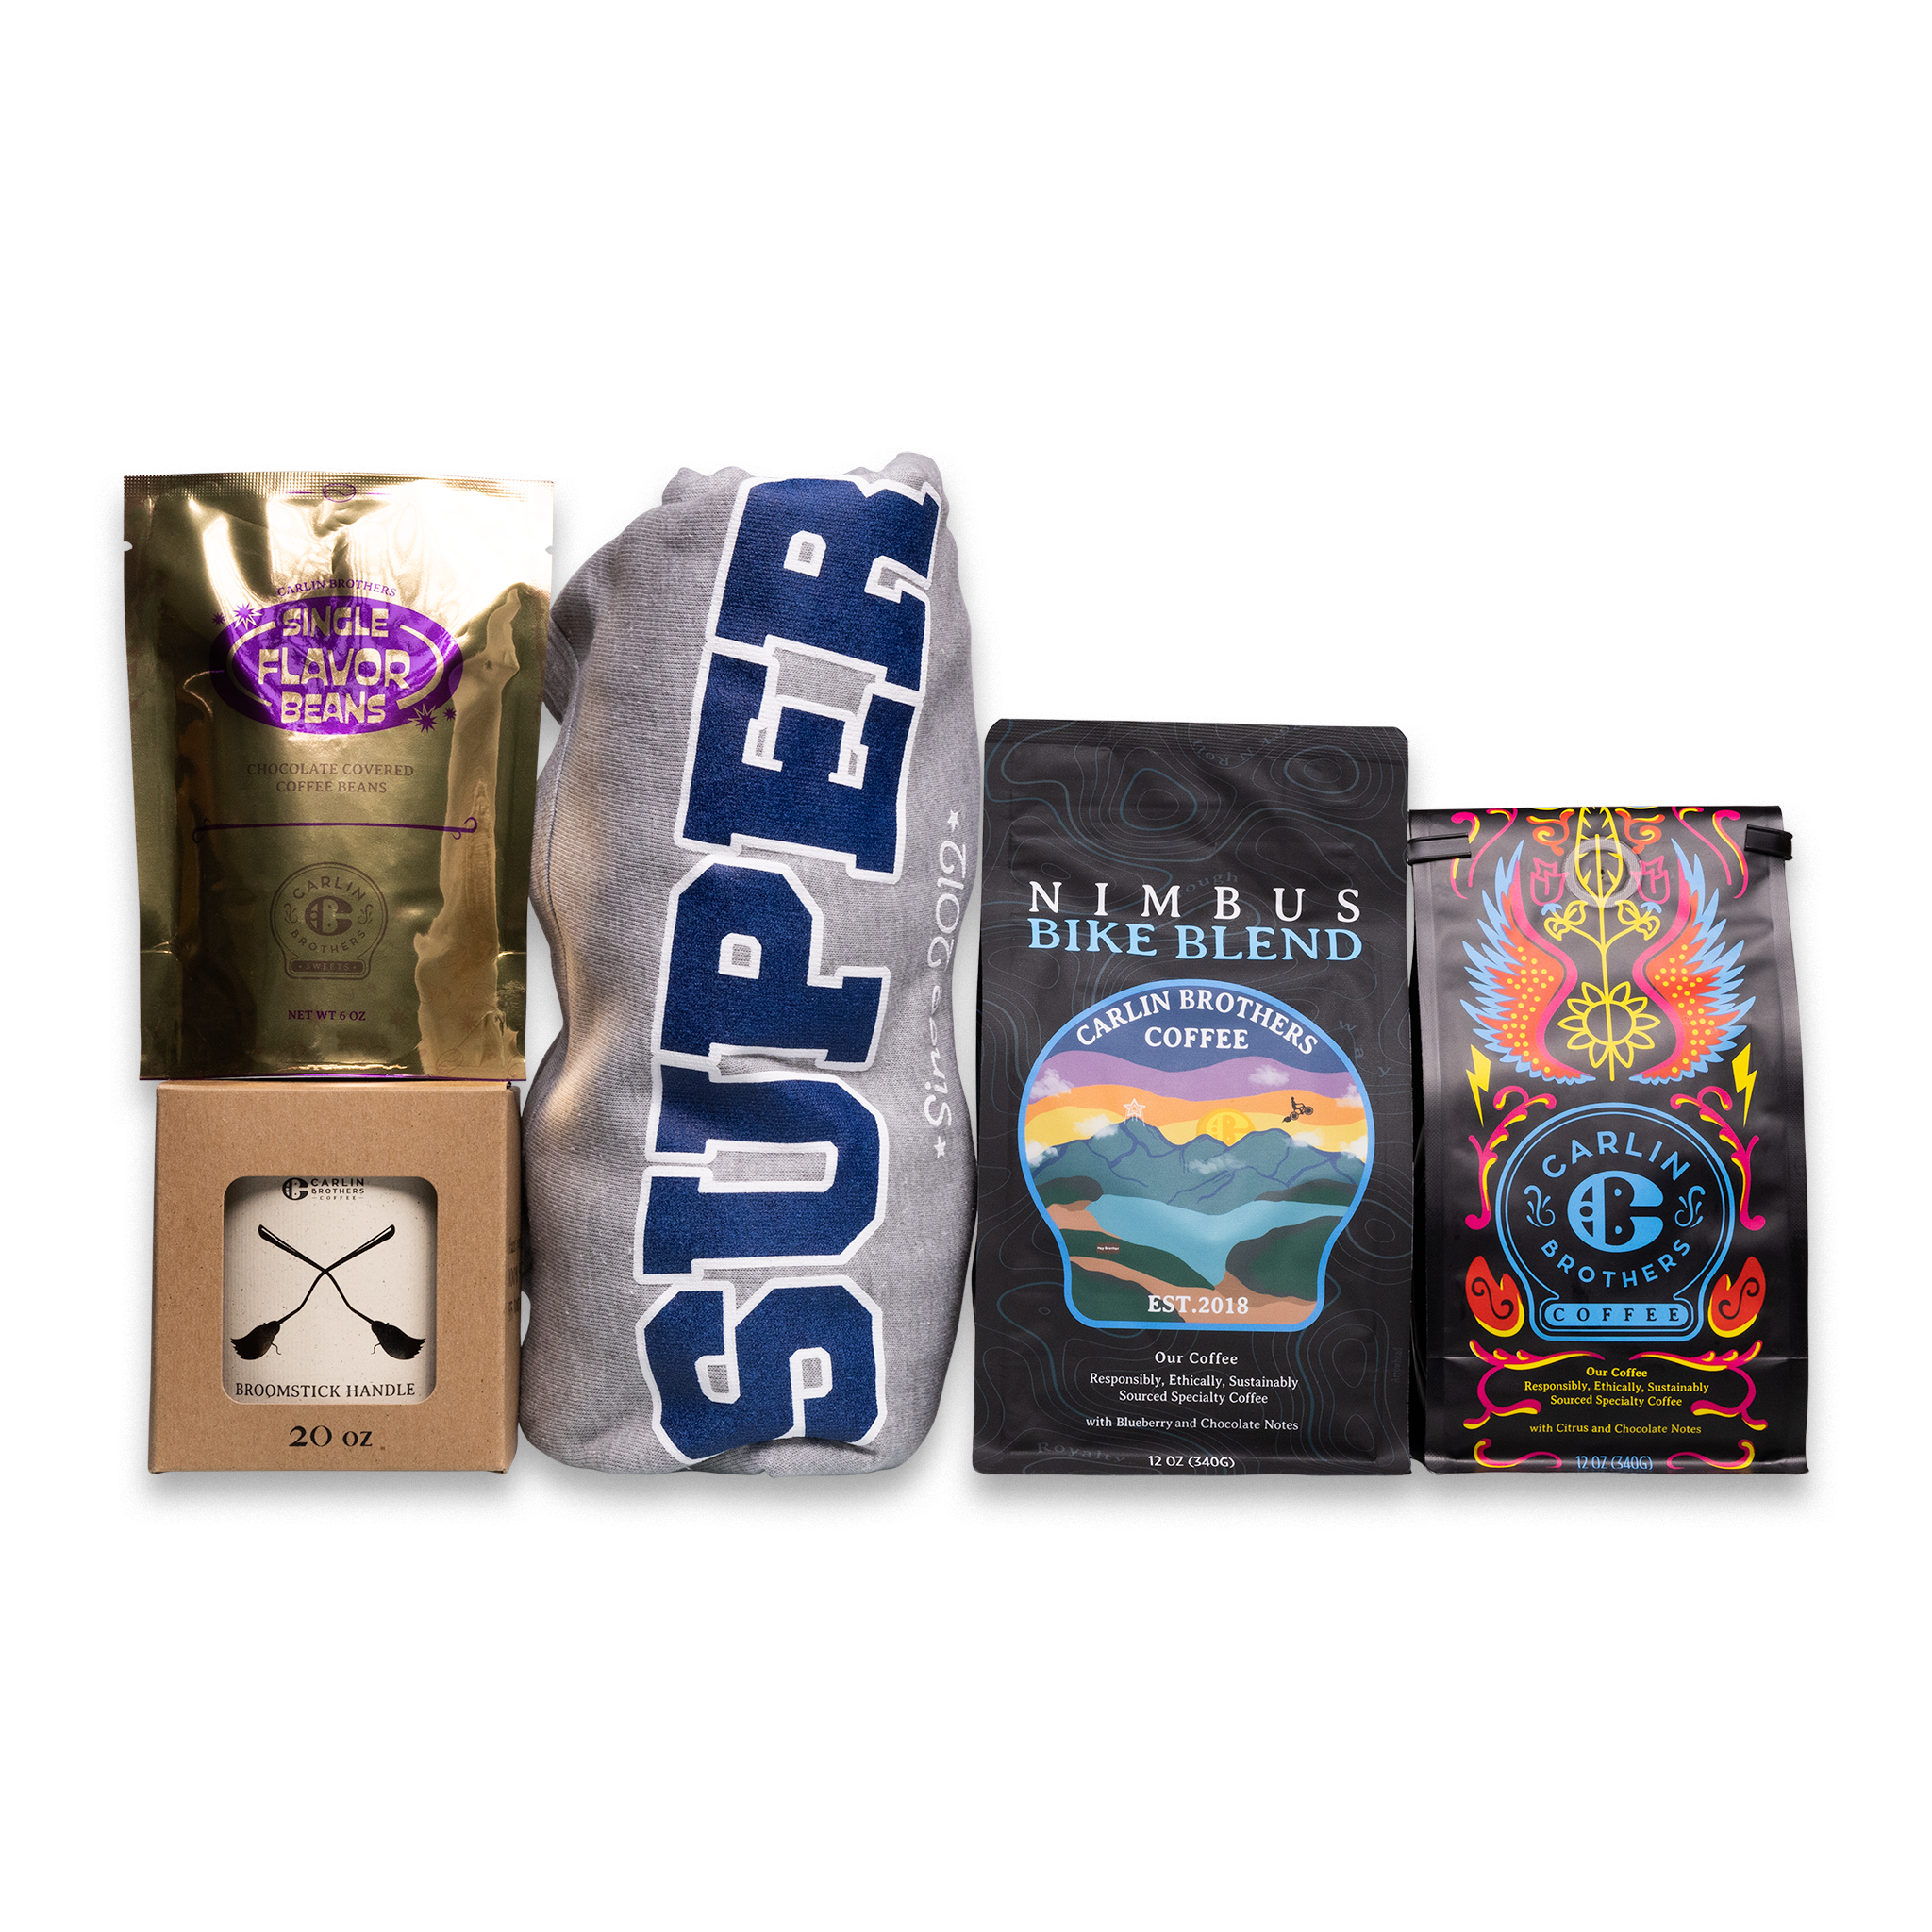 Carlin Brothers Super Coffee Bundle including Broomstick Handle Candle, Super Crewneck, Nimbus Blend Coffee, Original Coffee, and Single Flavor Beans